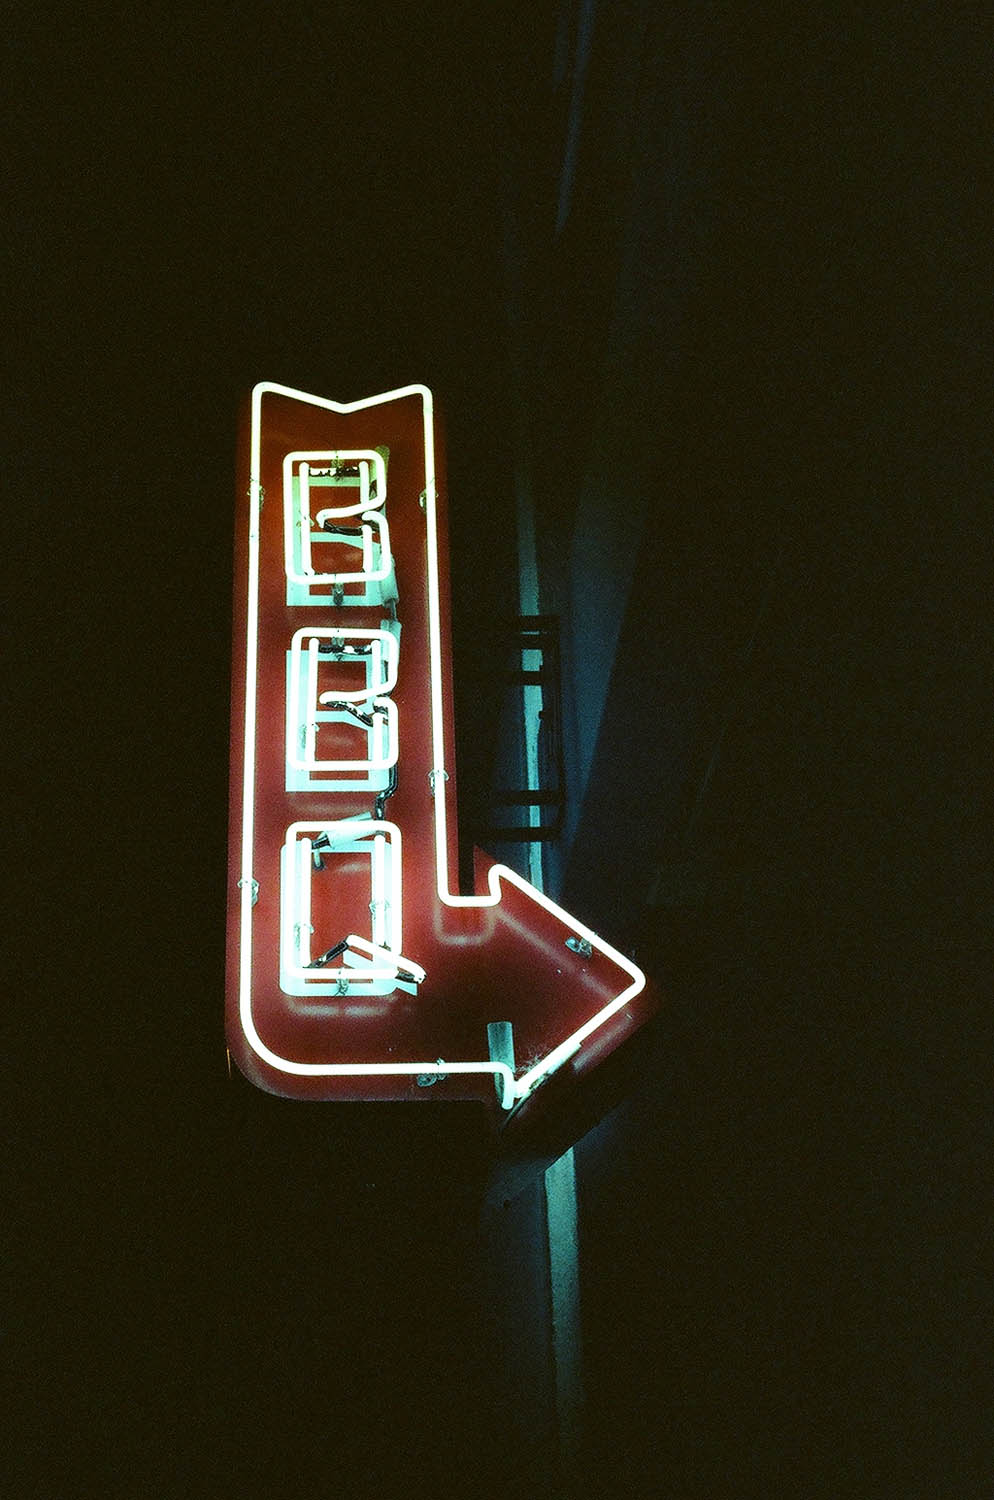 Taken with my Canon AE-1 at night.